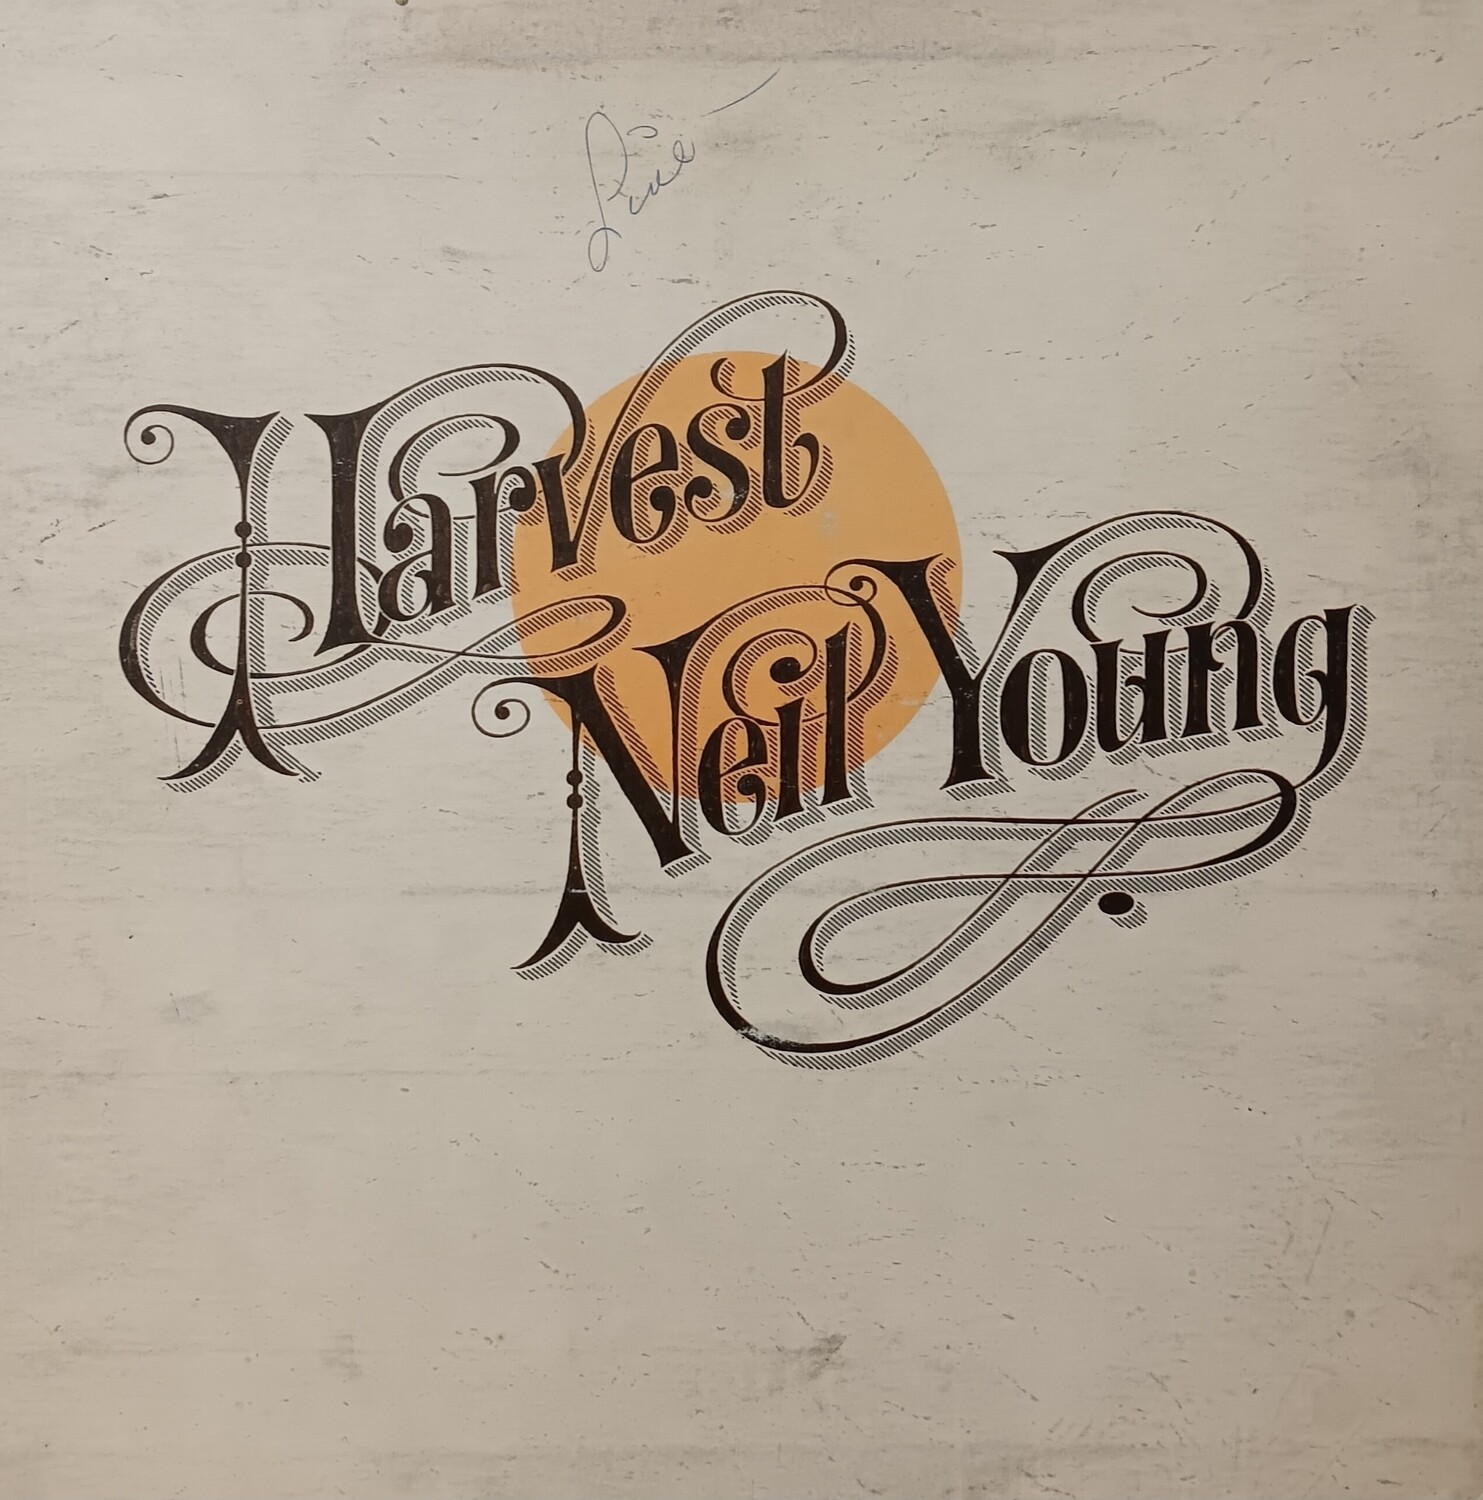 NEIL YOUNG - Harvest Moon